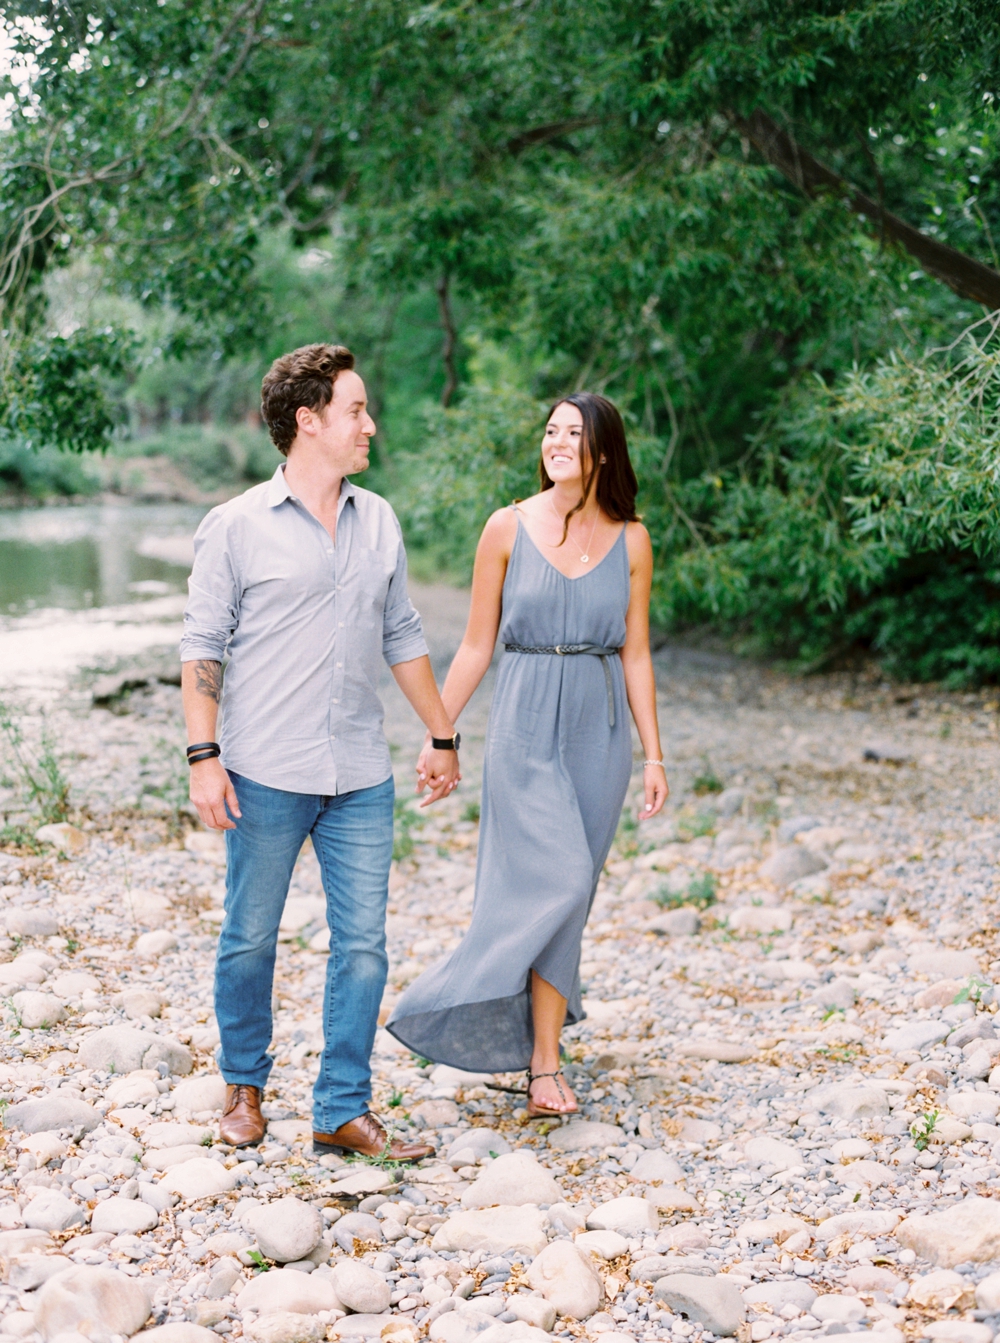 3 Easy Tips That Calgary Engagement Photographers Should Keep in Mind